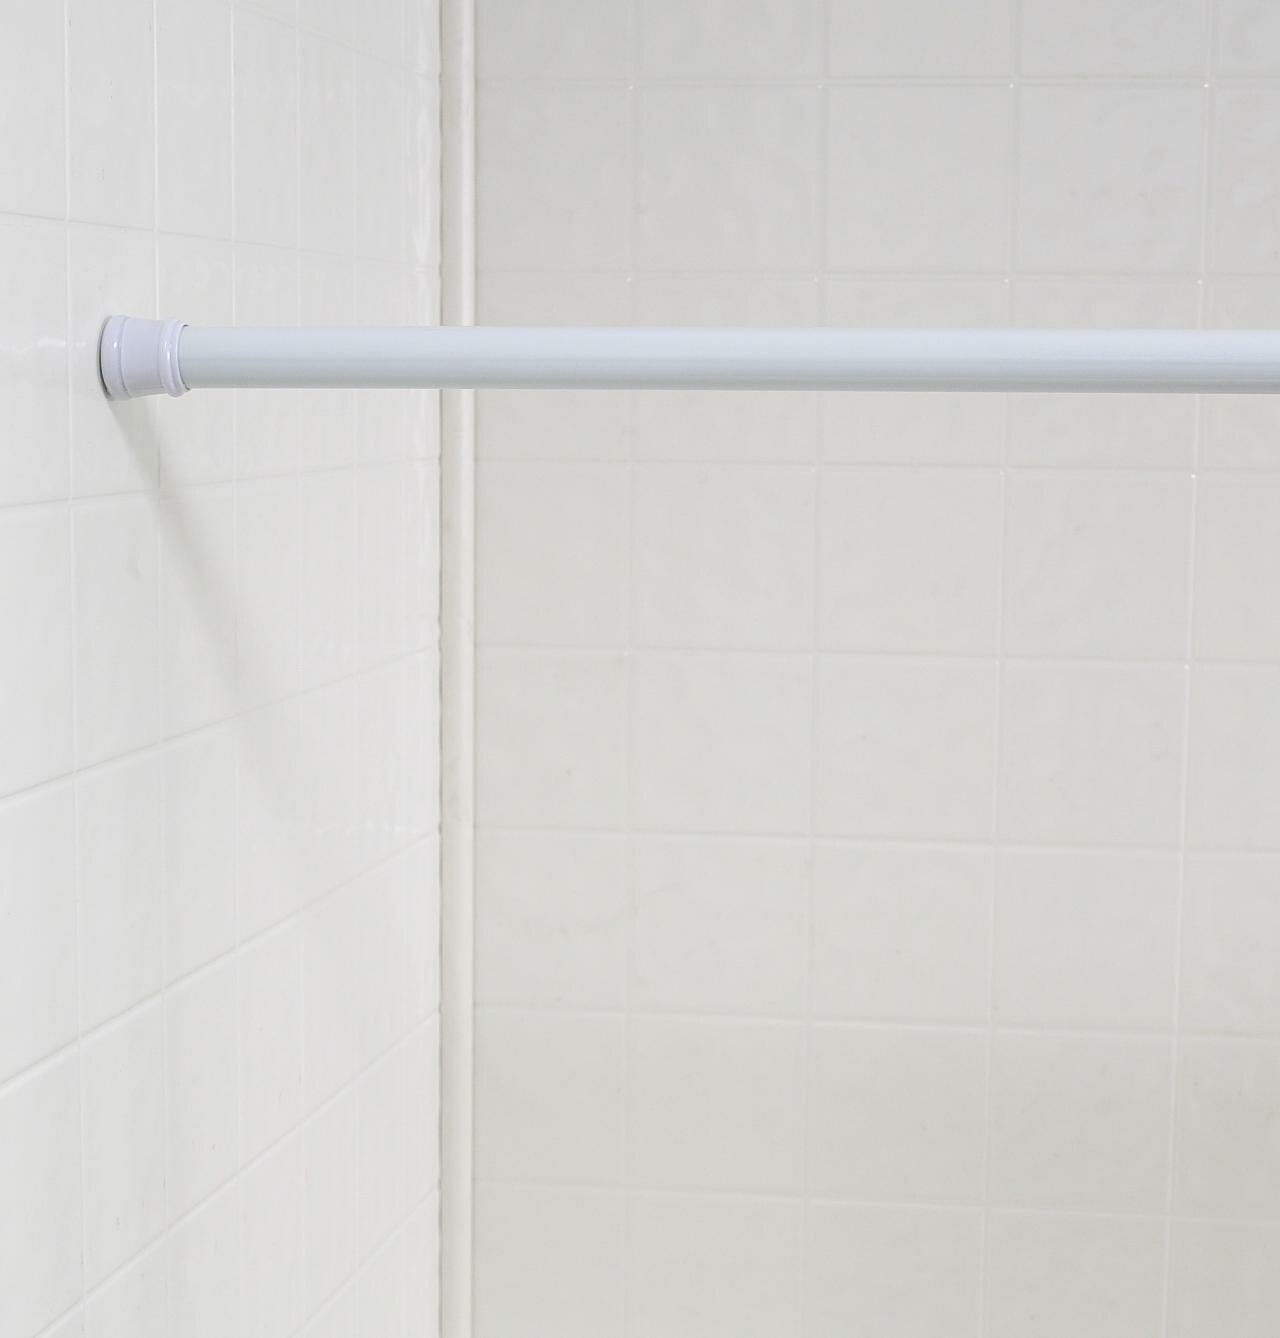 Shower Curtain Tension Rod | Shower Rod Tension | Shower Curtains For Curved Rods